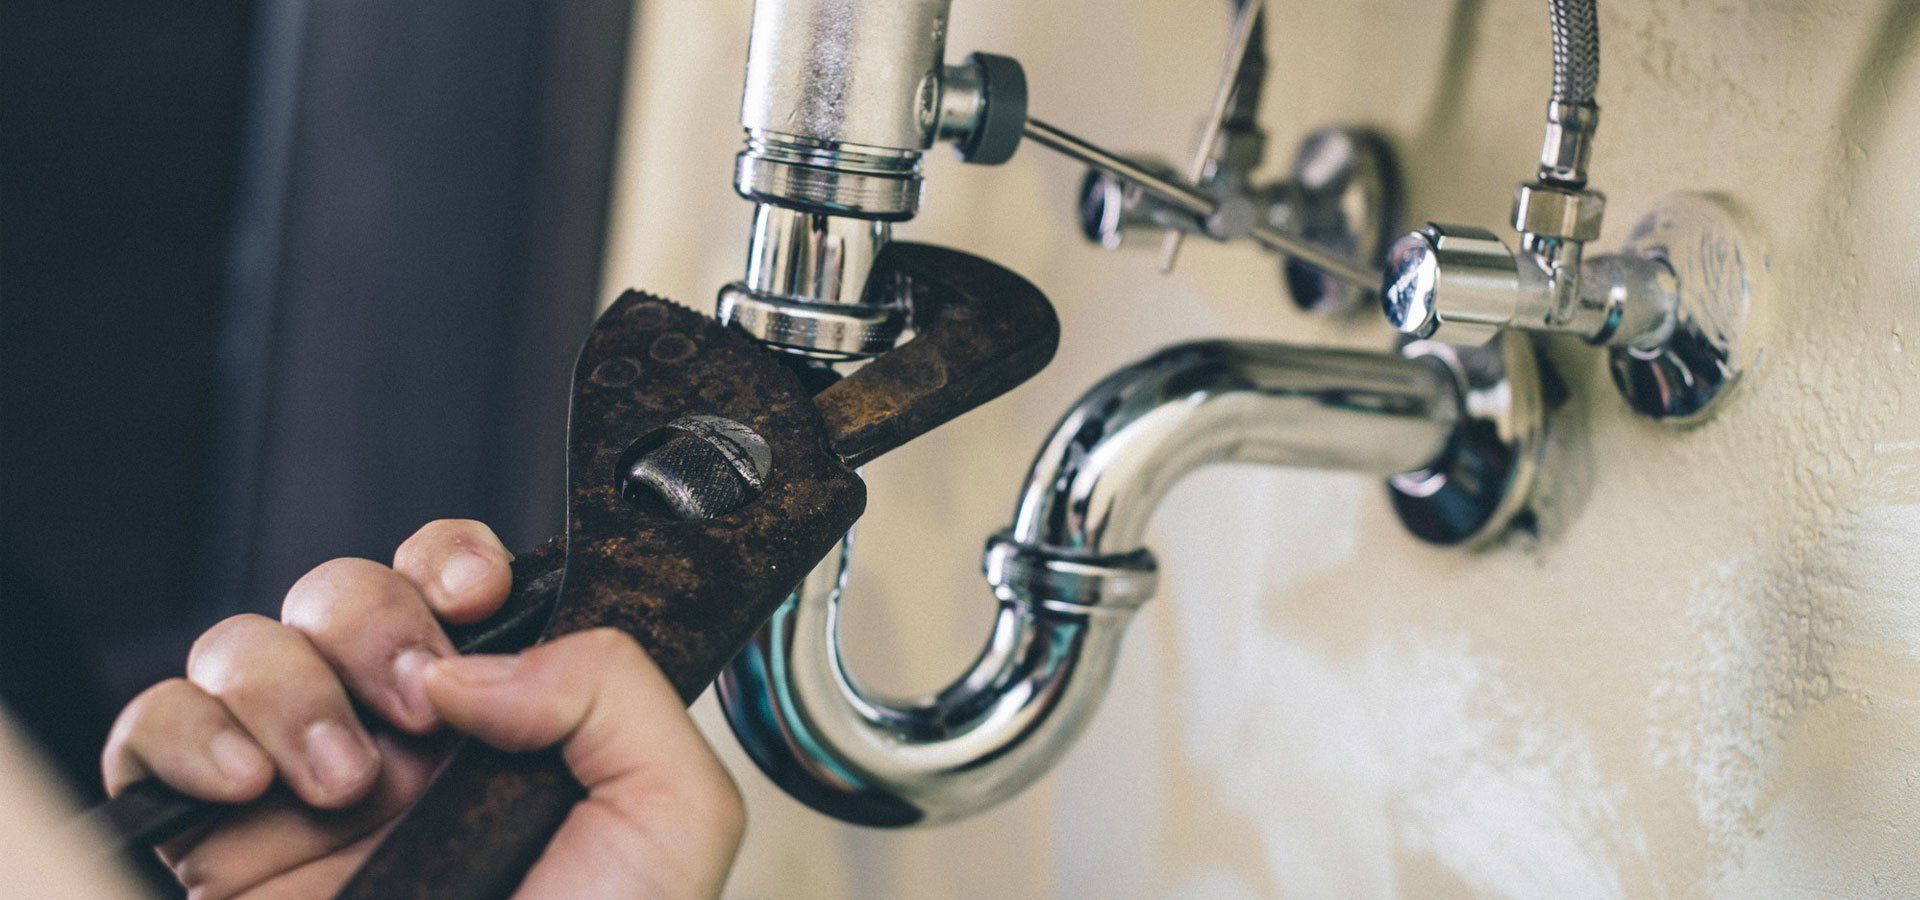 Plumbing and heating services in Hereford